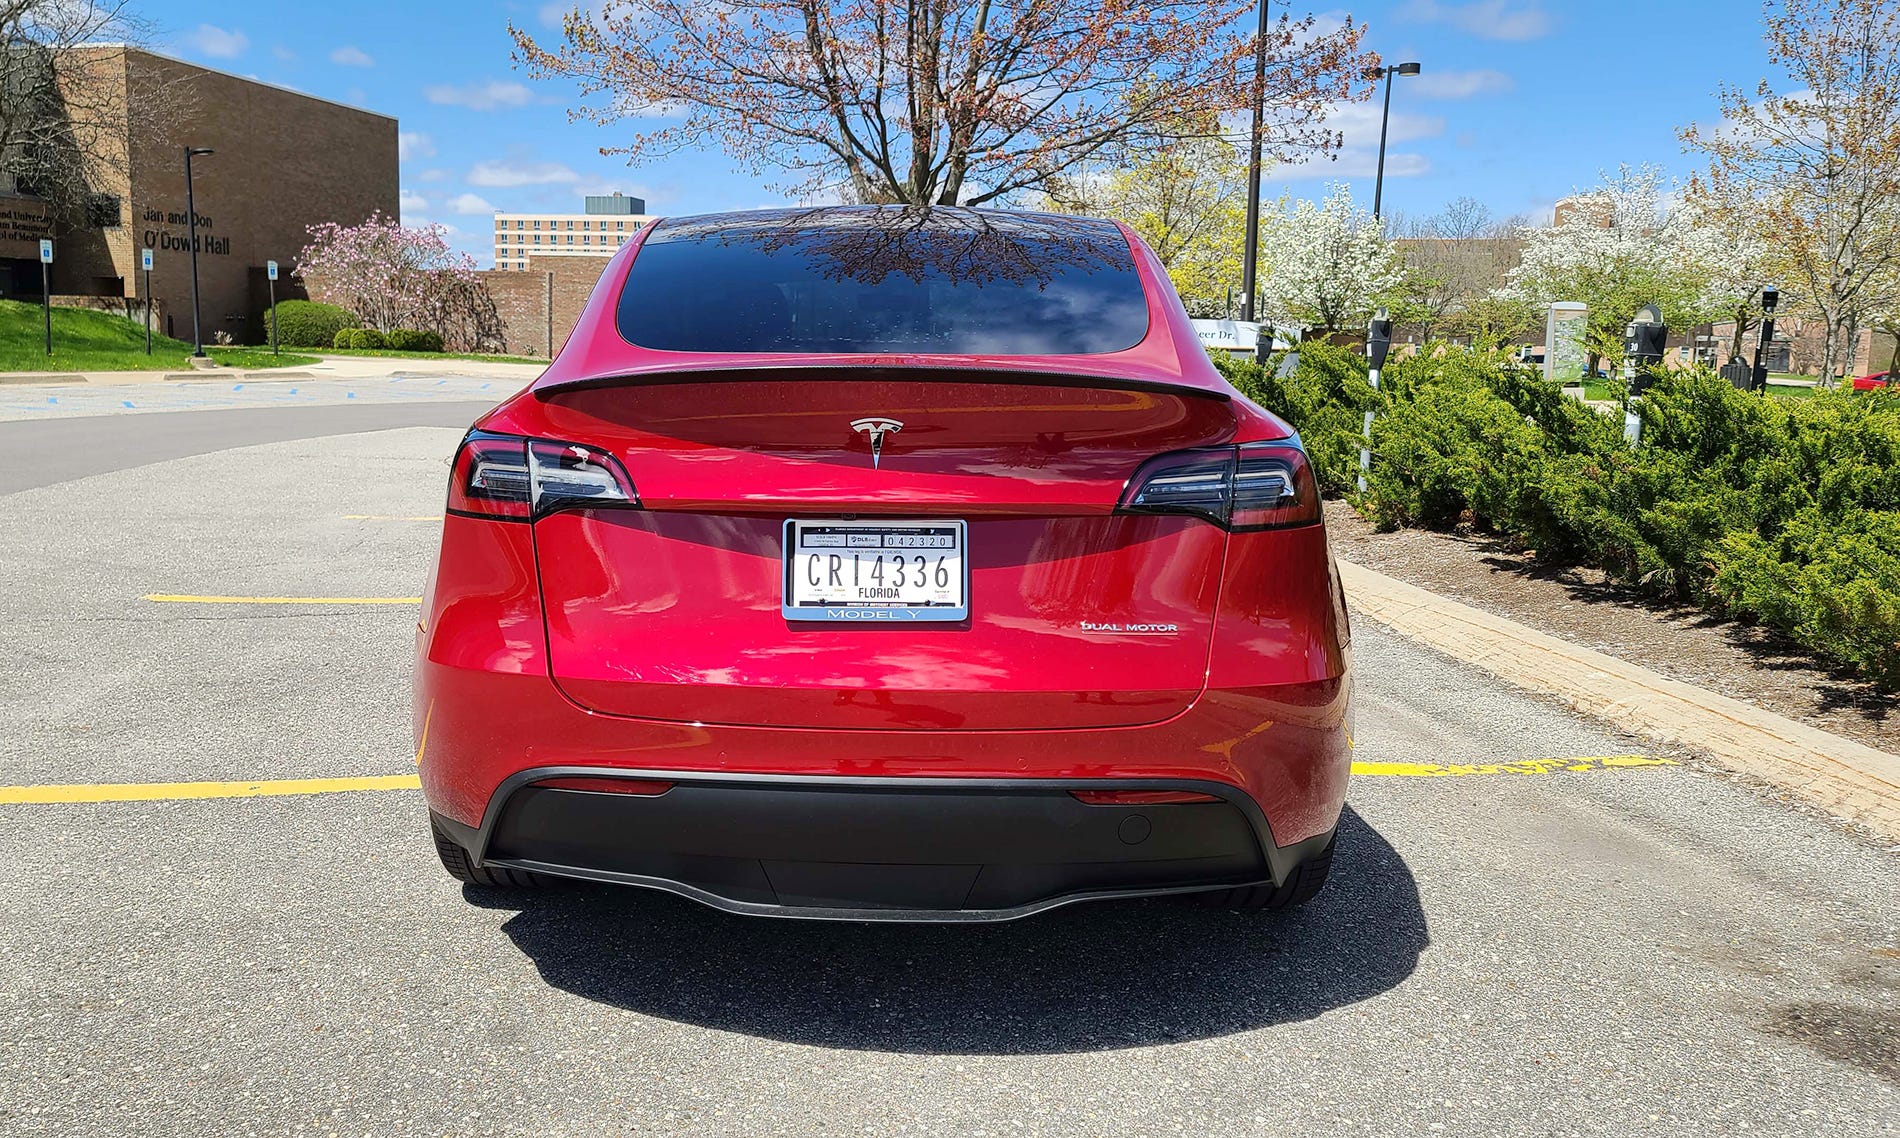 The rear of the Tesla Model Y adds a spoiler to the Performance model.